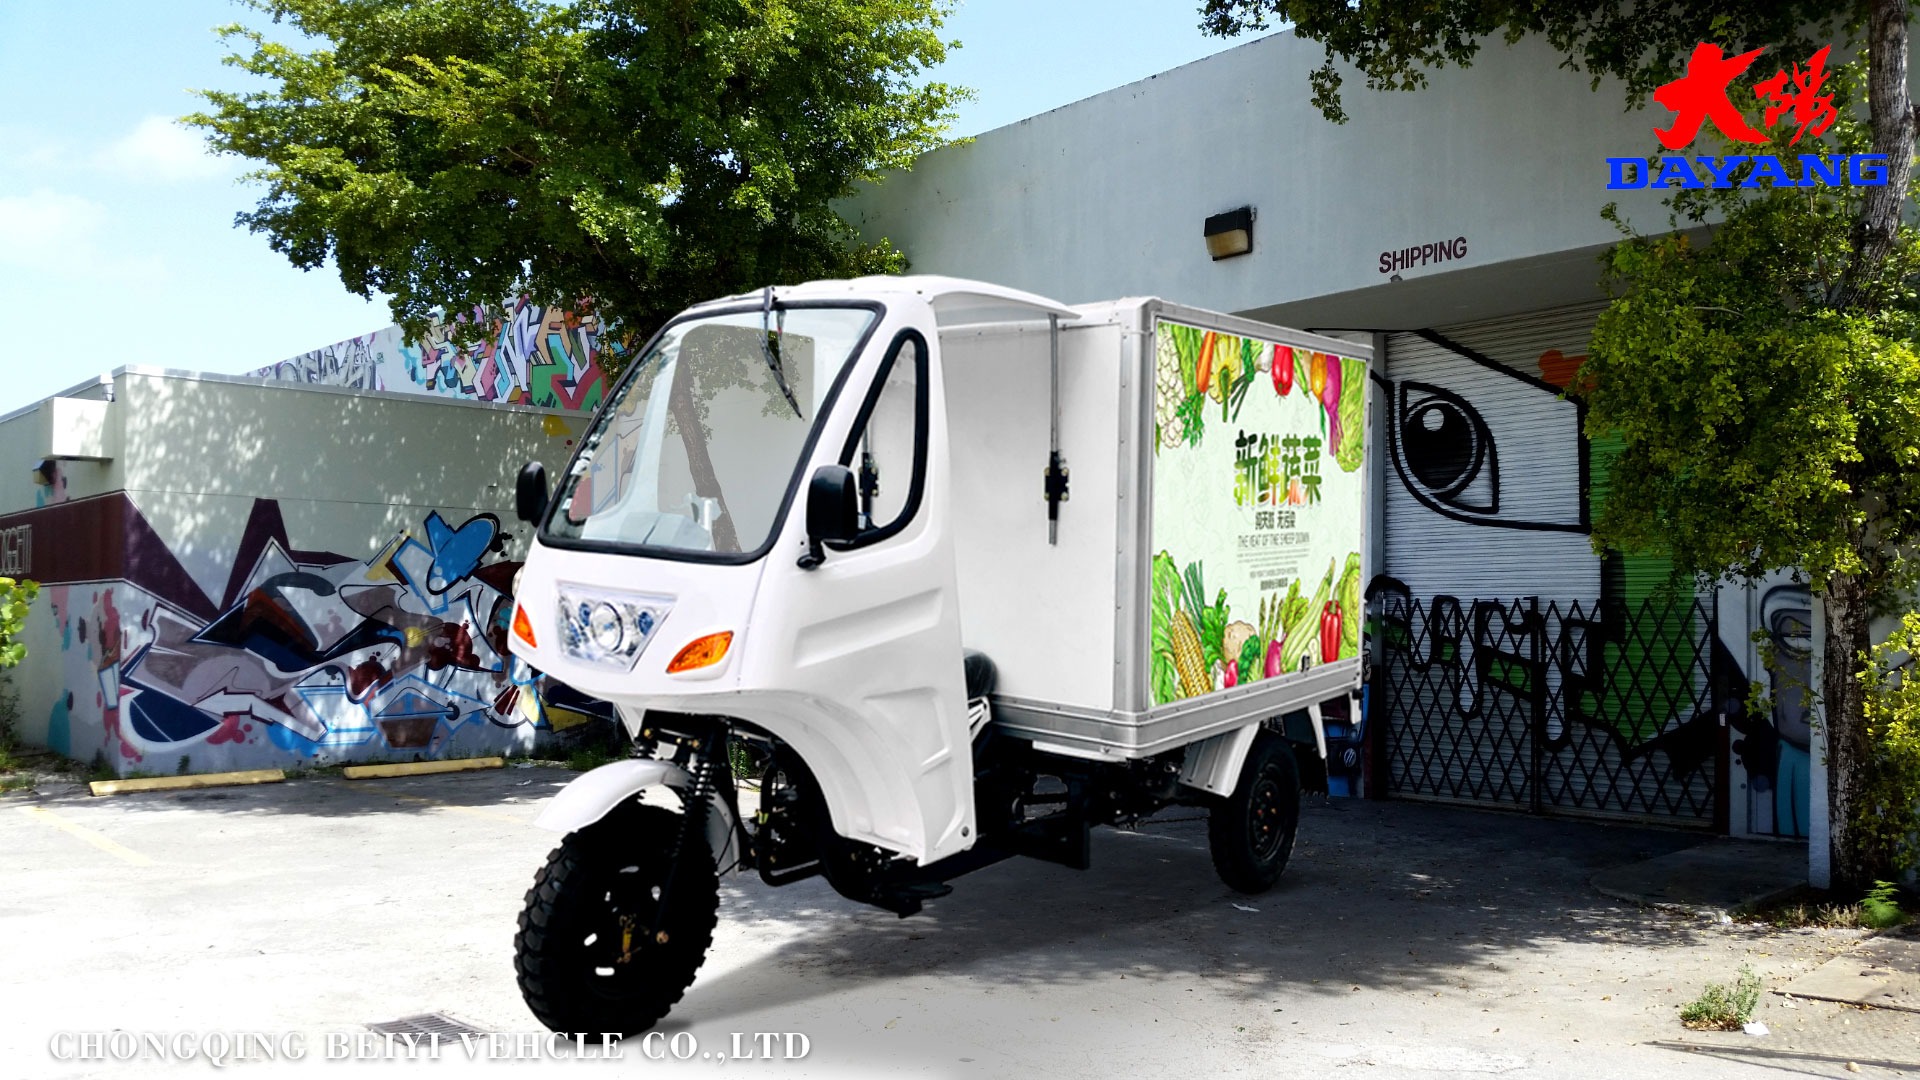 DY-B1 promotional mobile kitchen street food kiosk concession mobile bbq food trailer tricycle food cart